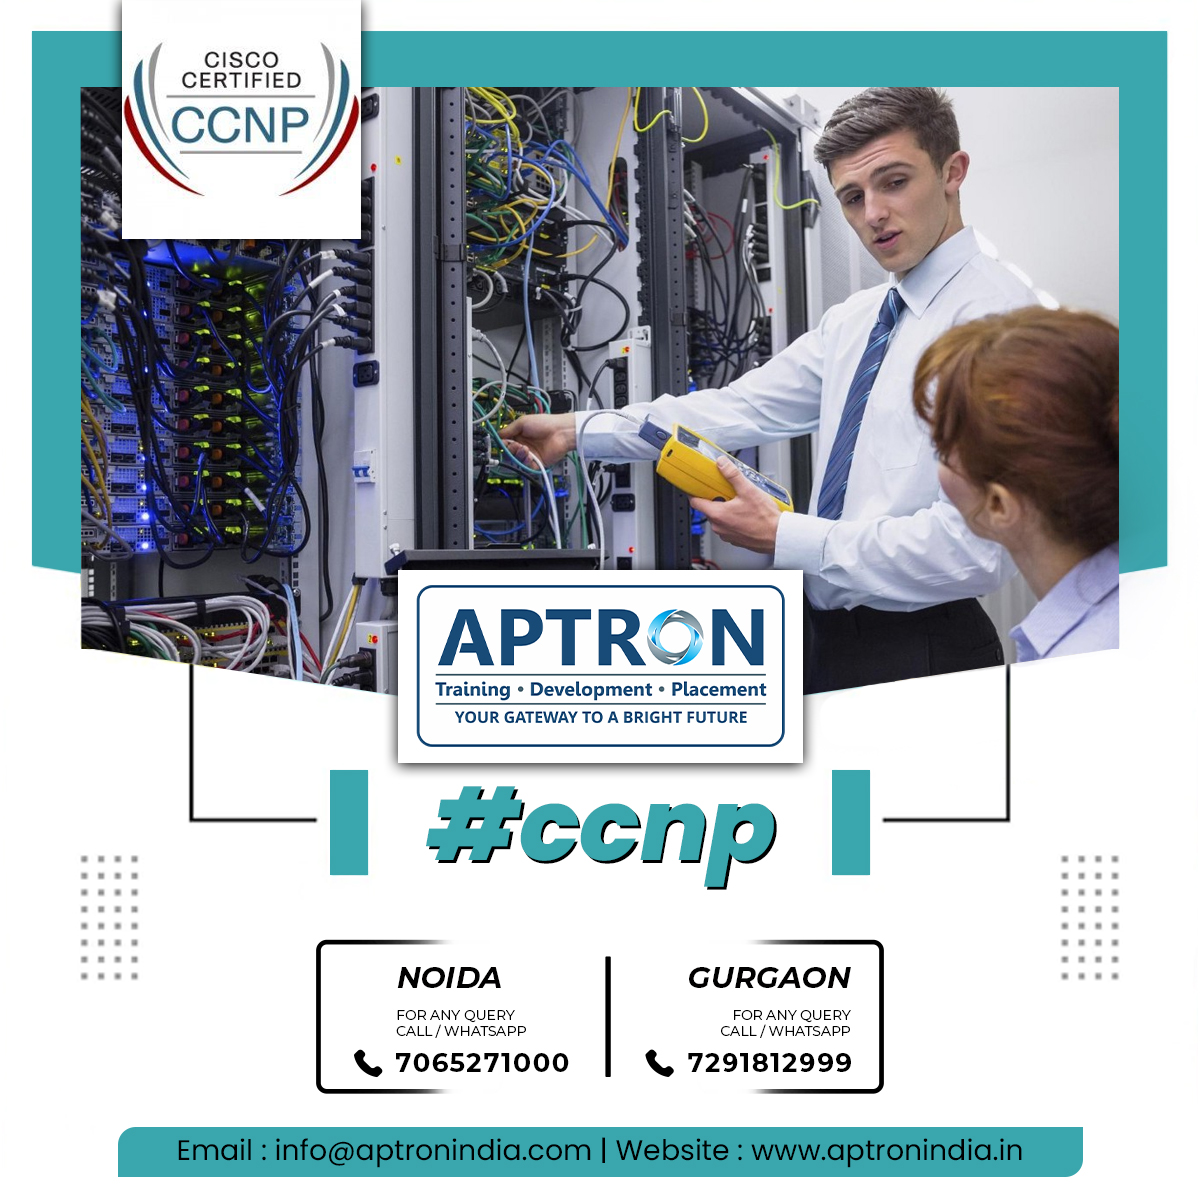 CCNP course in Gurgaon 